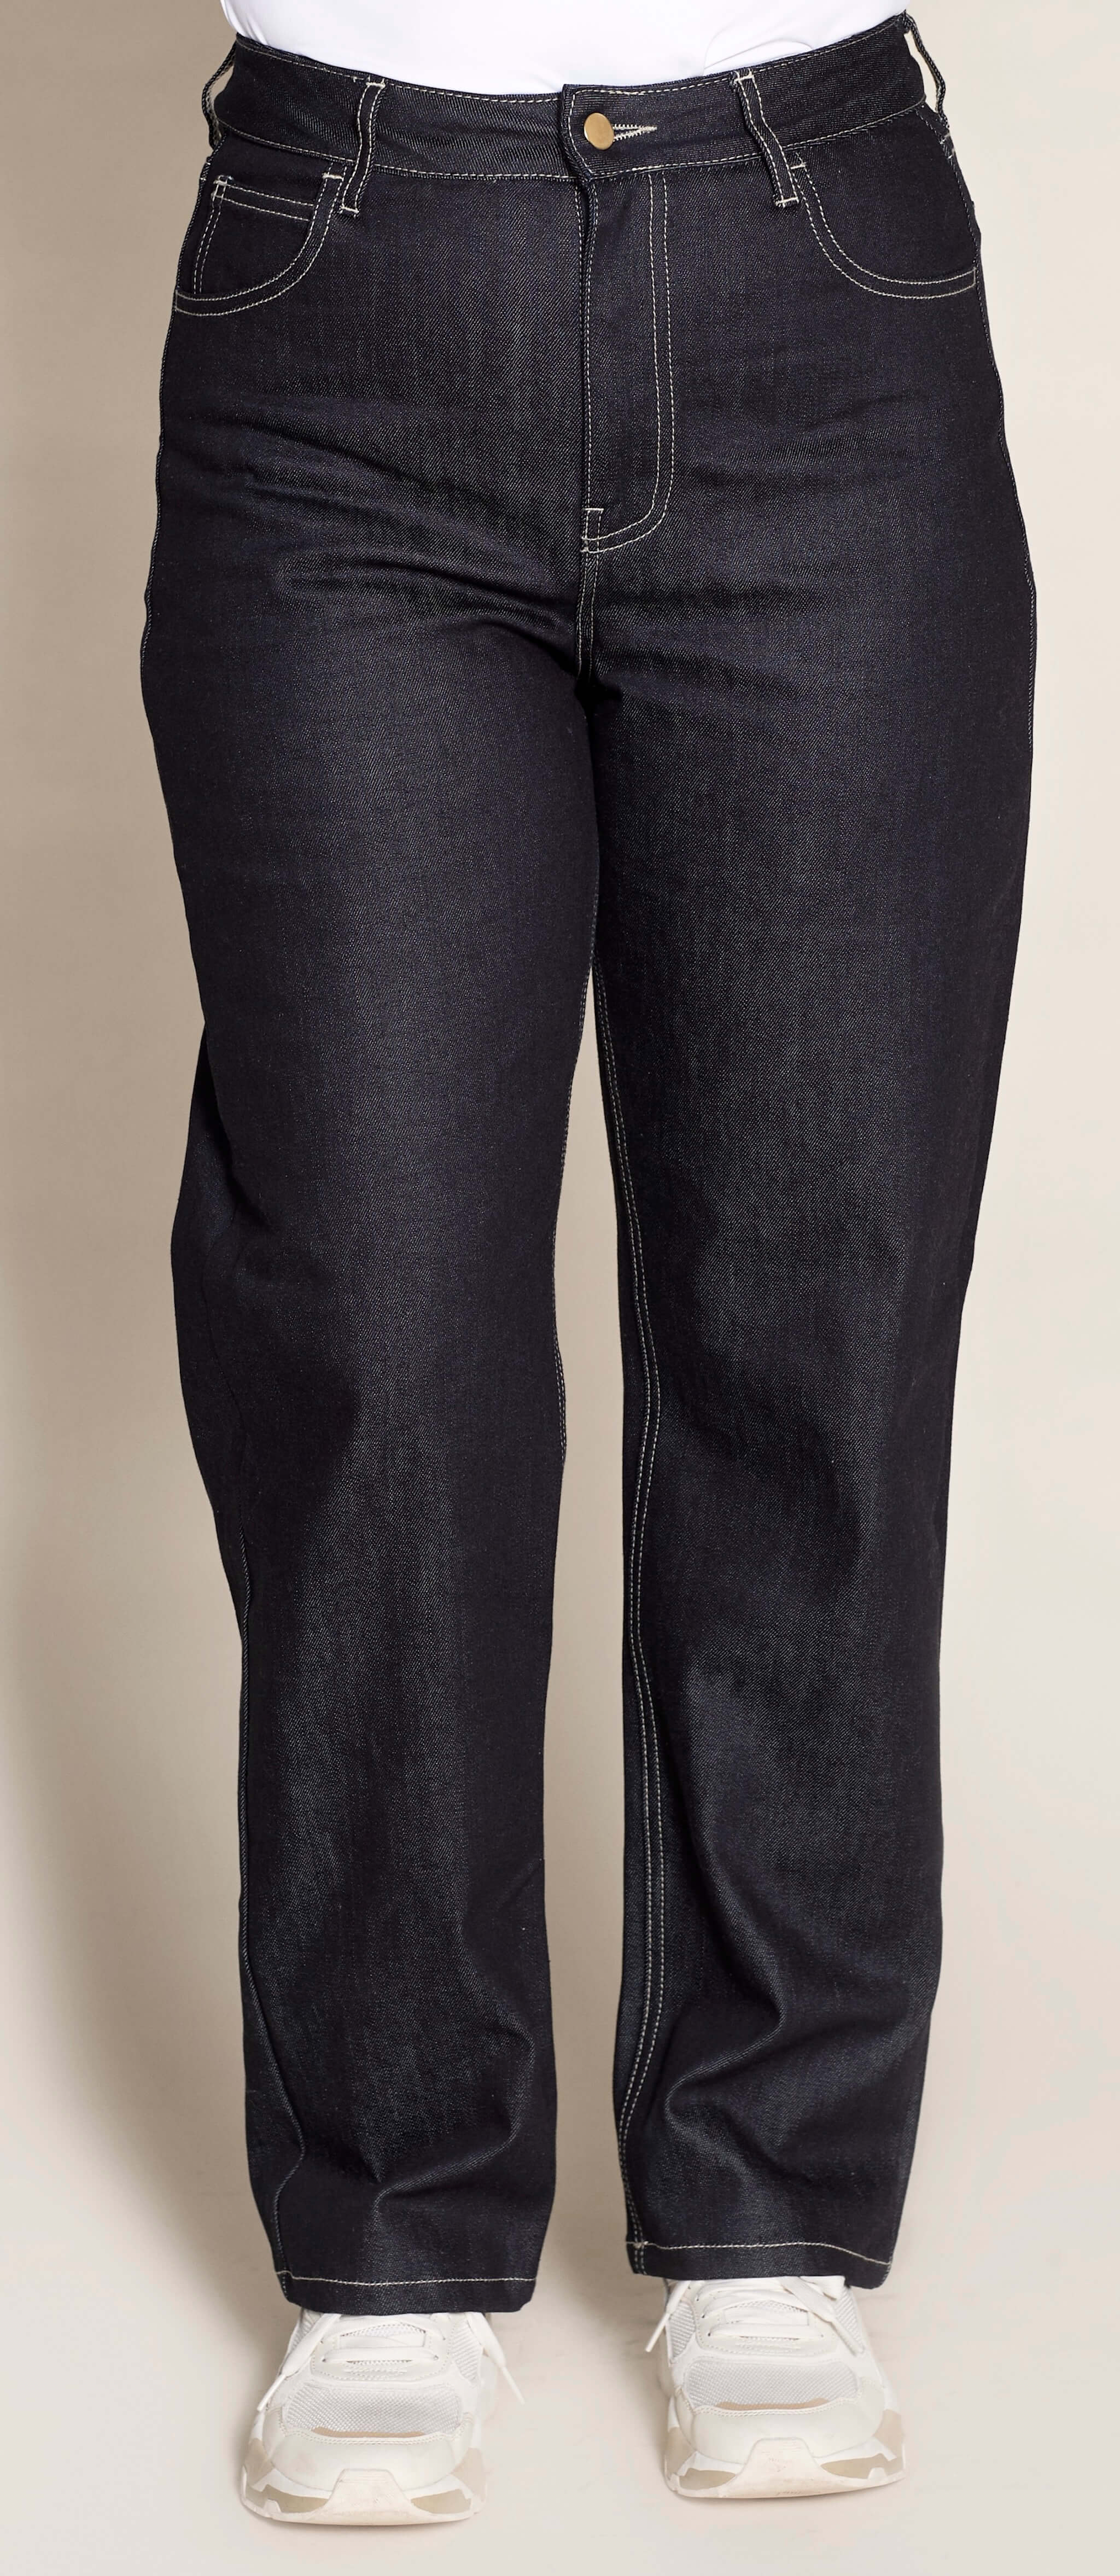 Front view of Cyme Copenhagen's straight-leg dark denim jeans, featuring meticulous stitching and a comfortable fit, epitomizing the brand's Scandinavian design ethos with sustainable fashion.